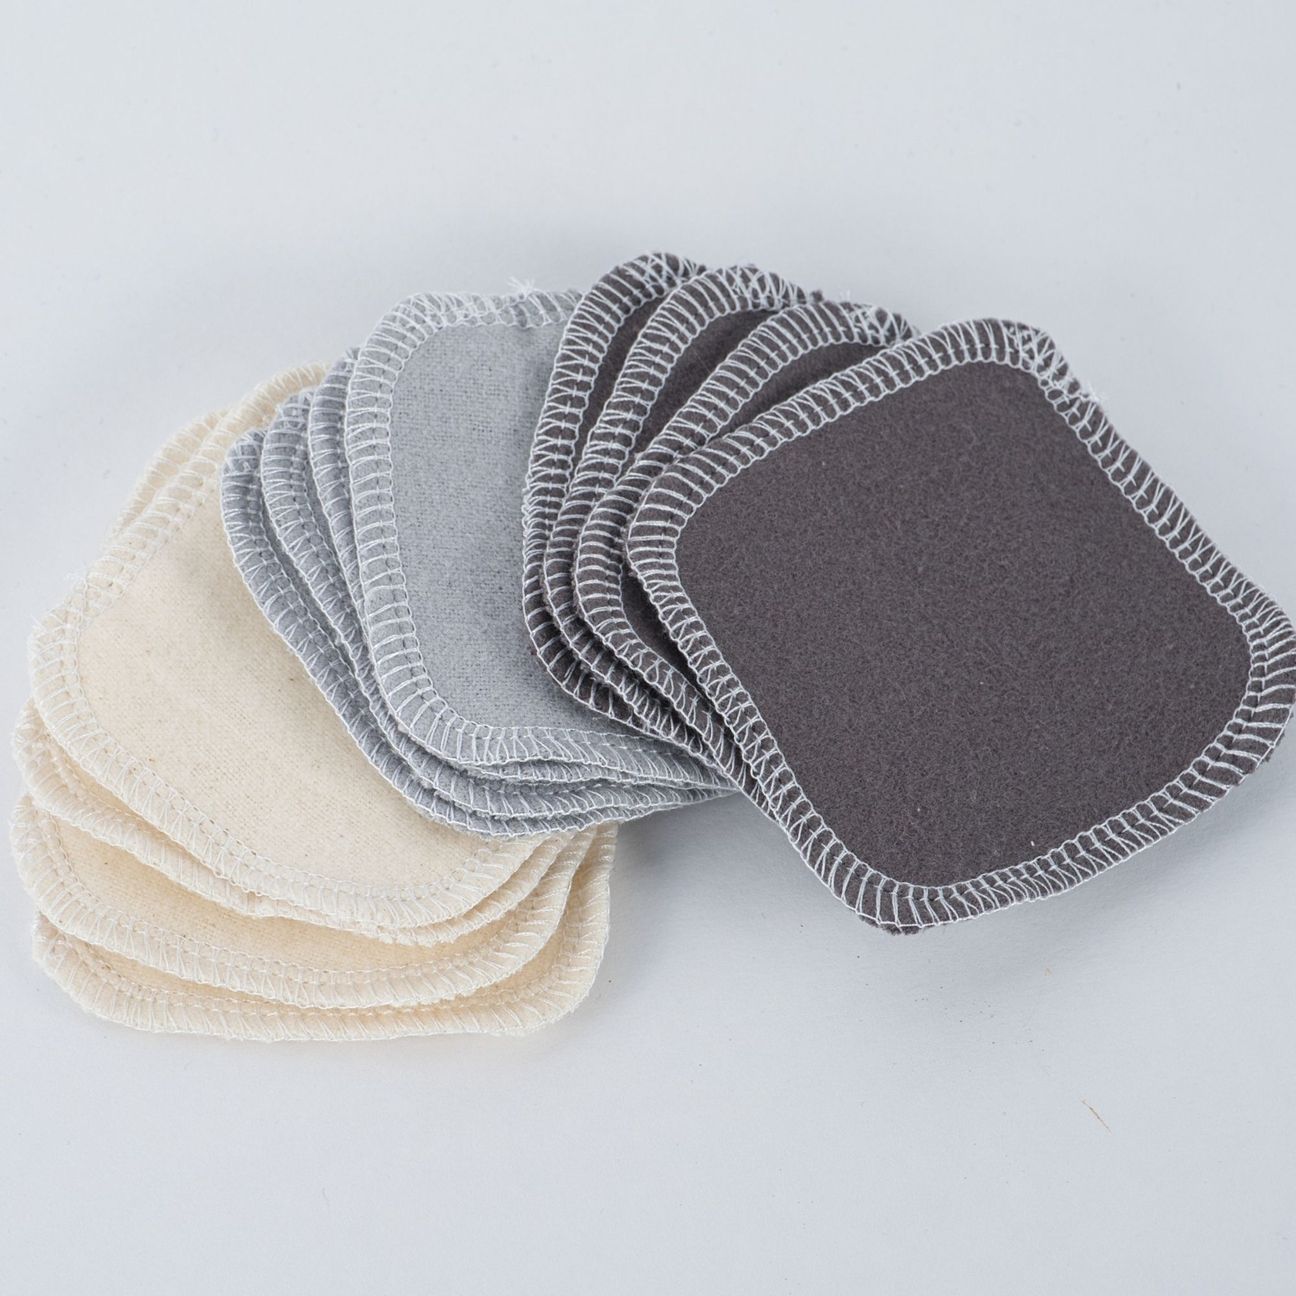 cheeks ahoy set of 12 reusable facial rounds warm neutrals charcoal spread out on a white table  top